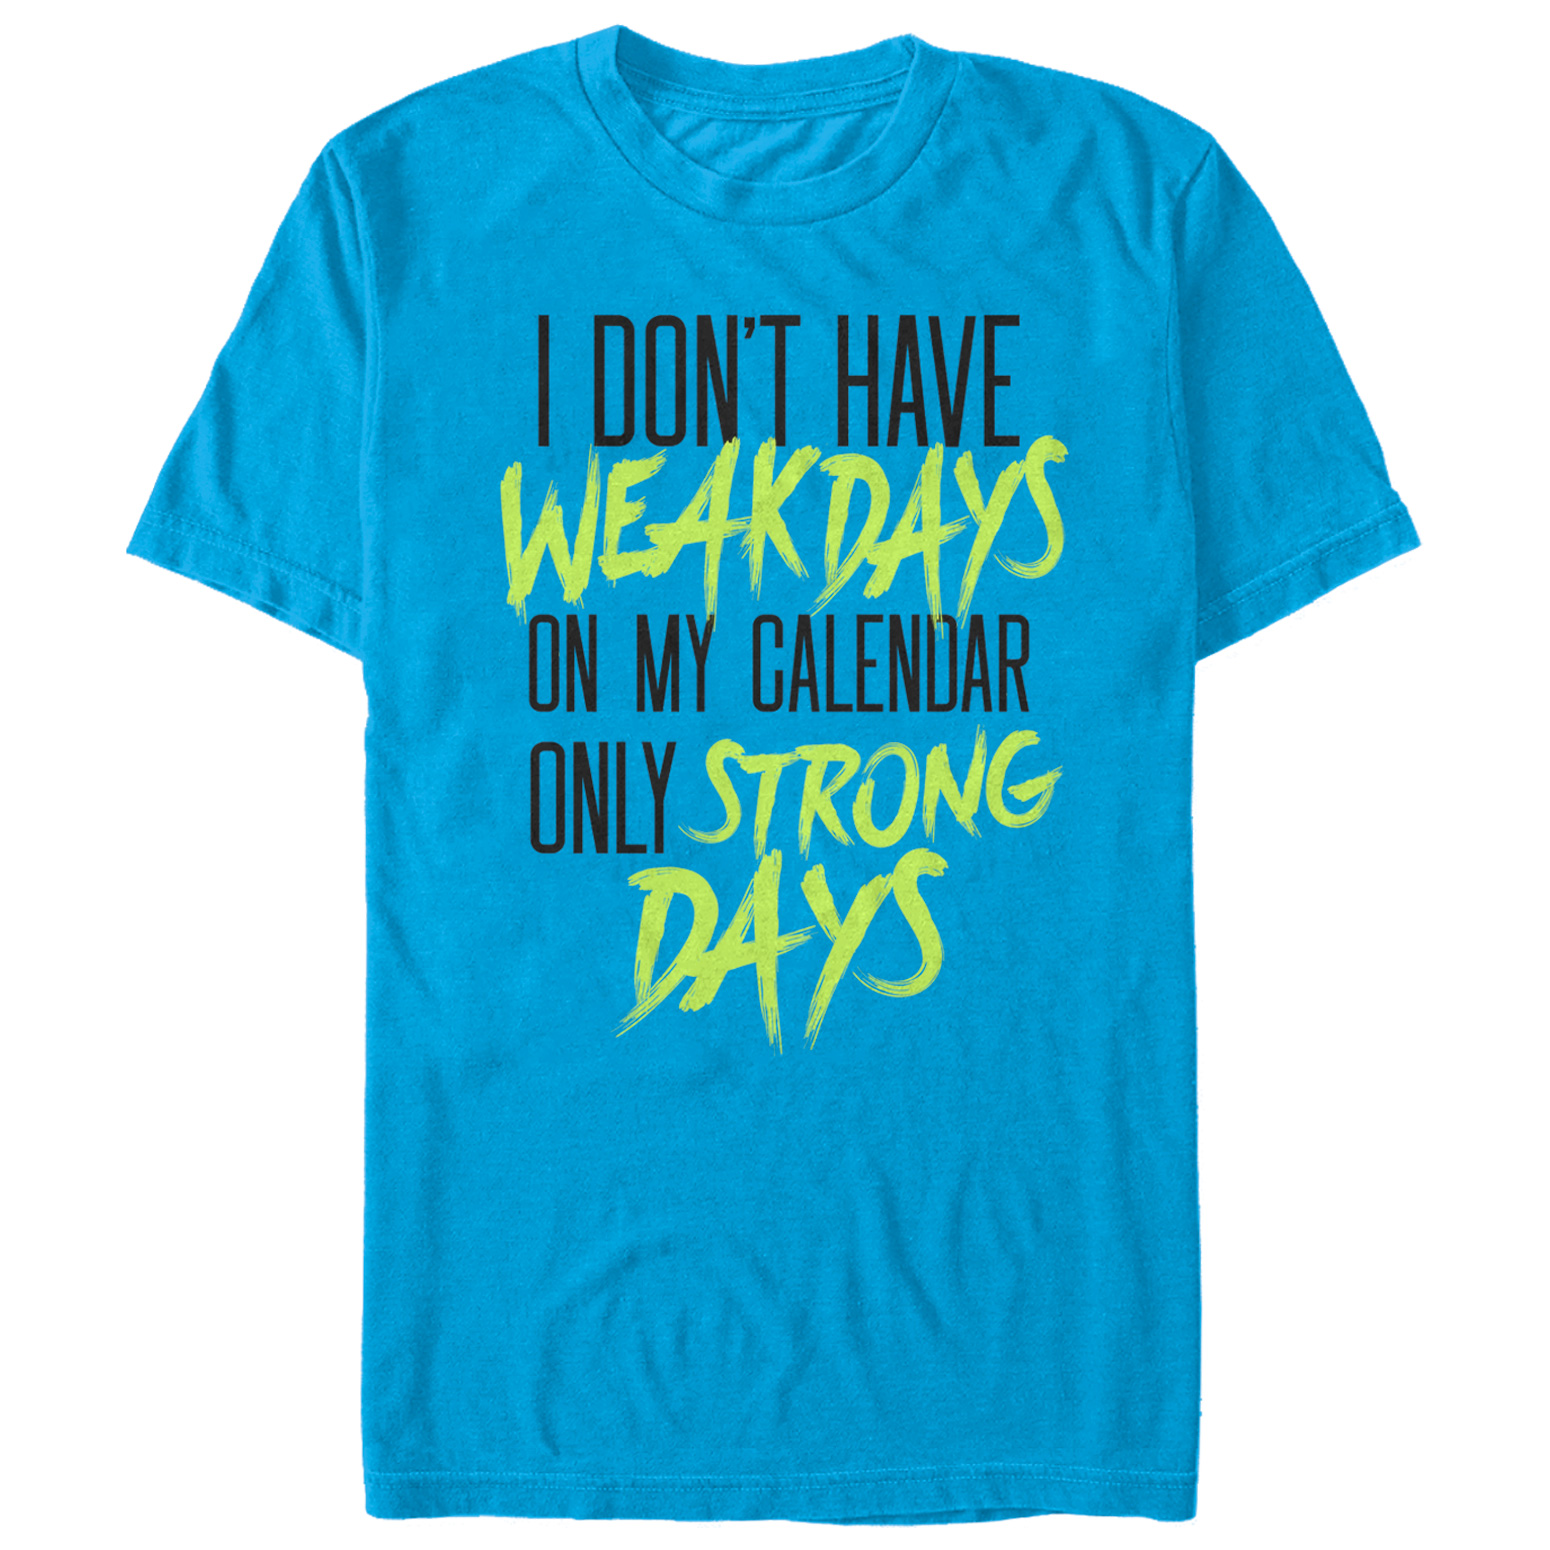 Chin-Up Apparel Men's CHIN UP Strong Days On Calendar  Graphic Tee